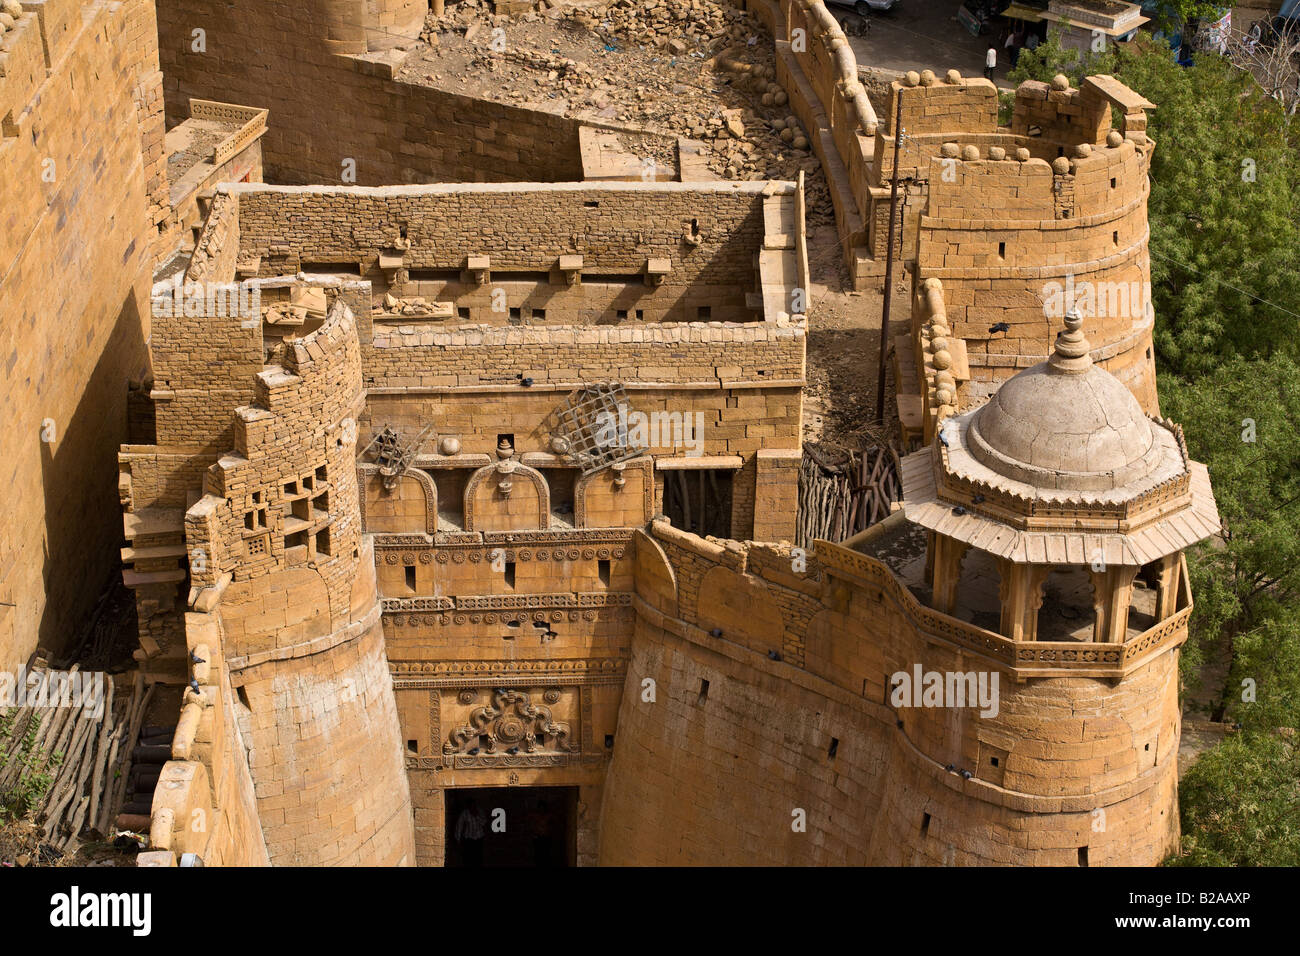 The MAIN GATE of JAISALMER FORT built in 1156 on Trikuta Hill out of golden sandstone RAJASTHAN INDIA Stock Photo